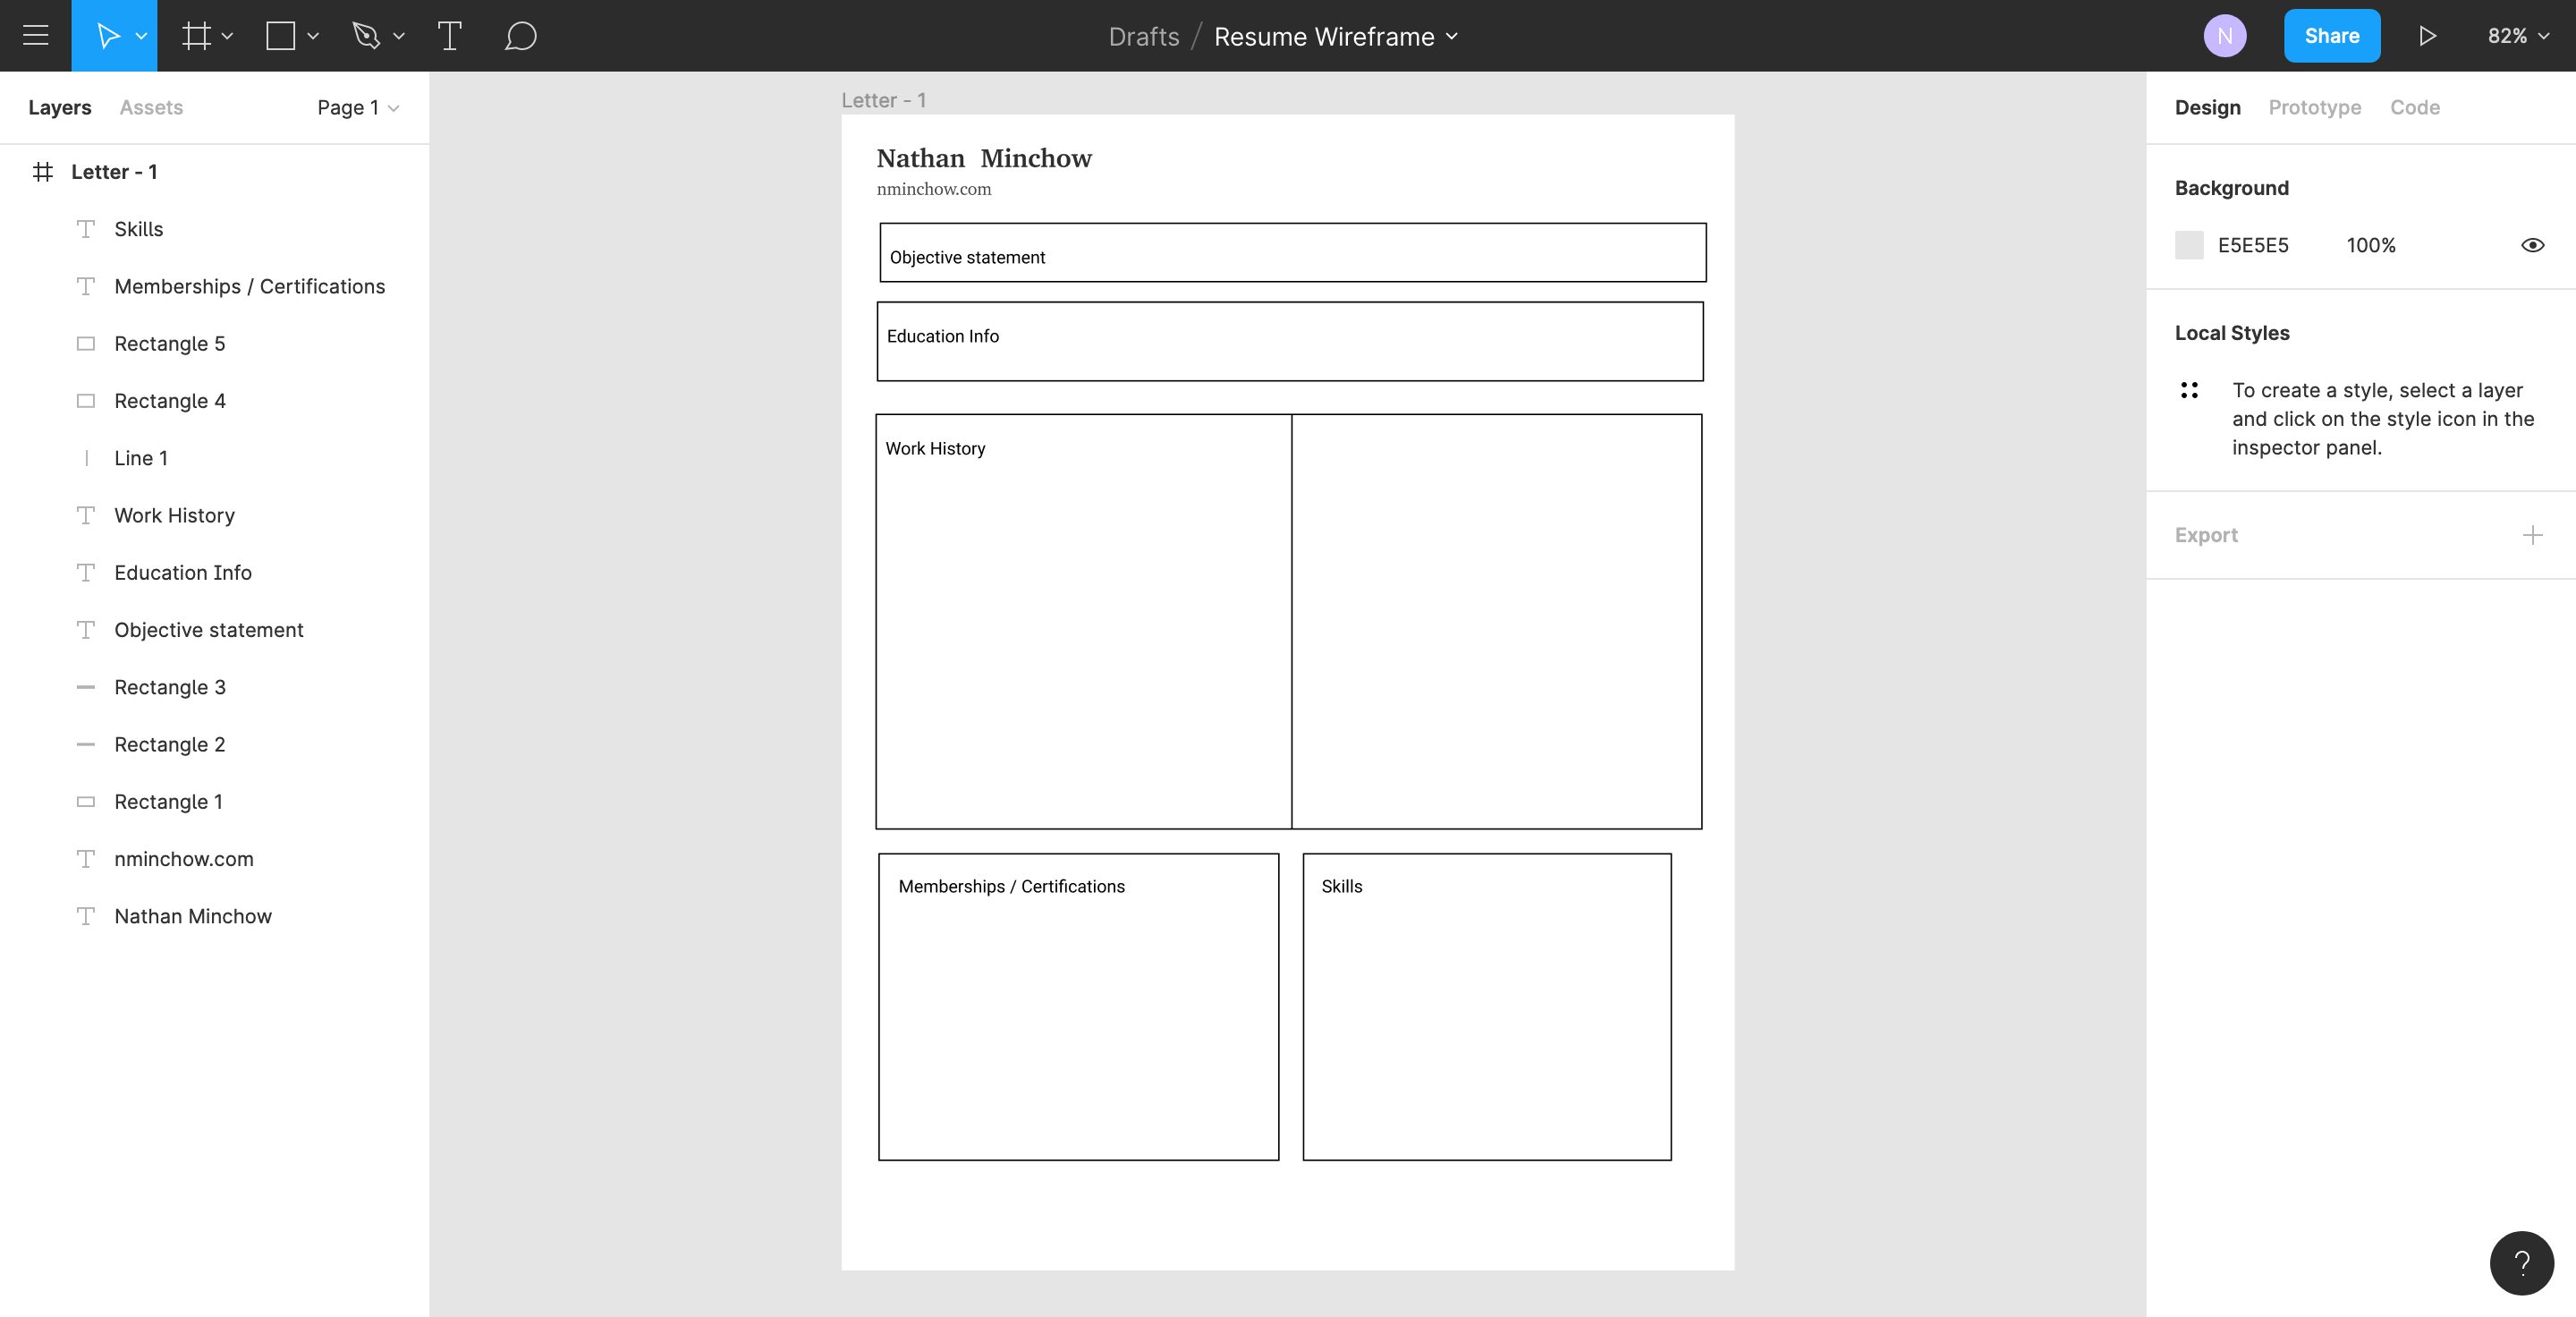 Wireframe of resume built in Figma